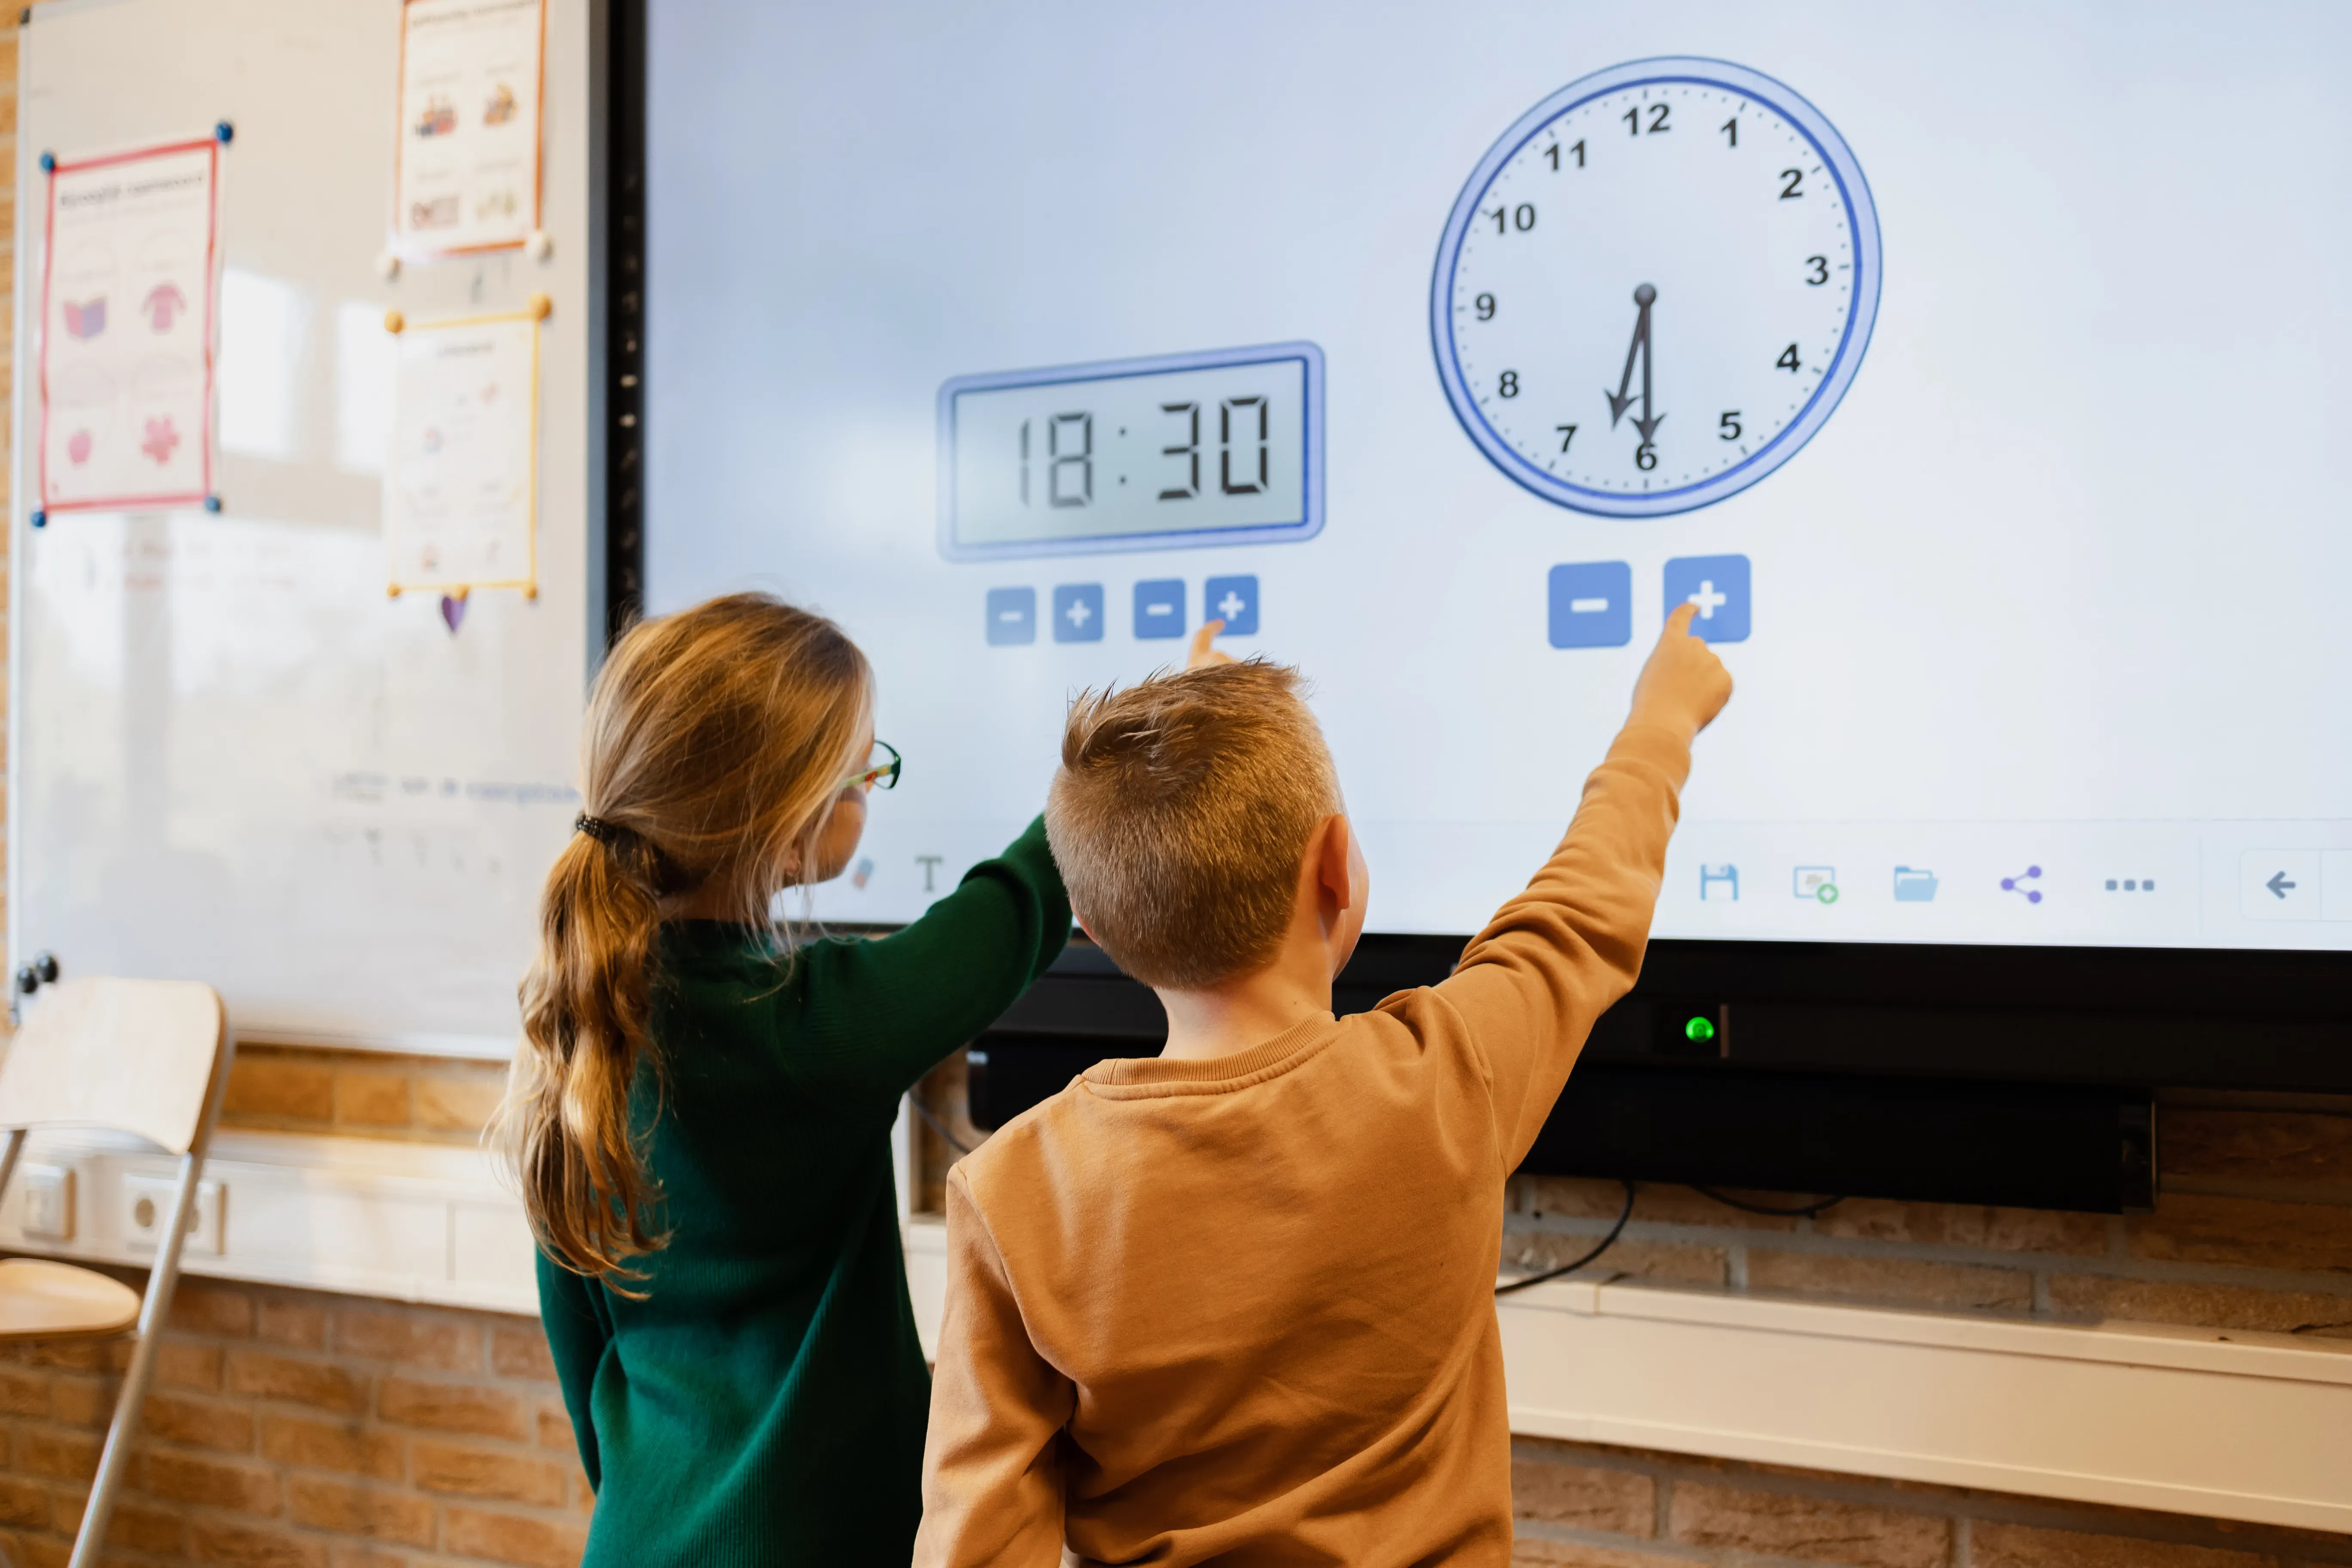 elementary school children using clocks and timers on a smartboard